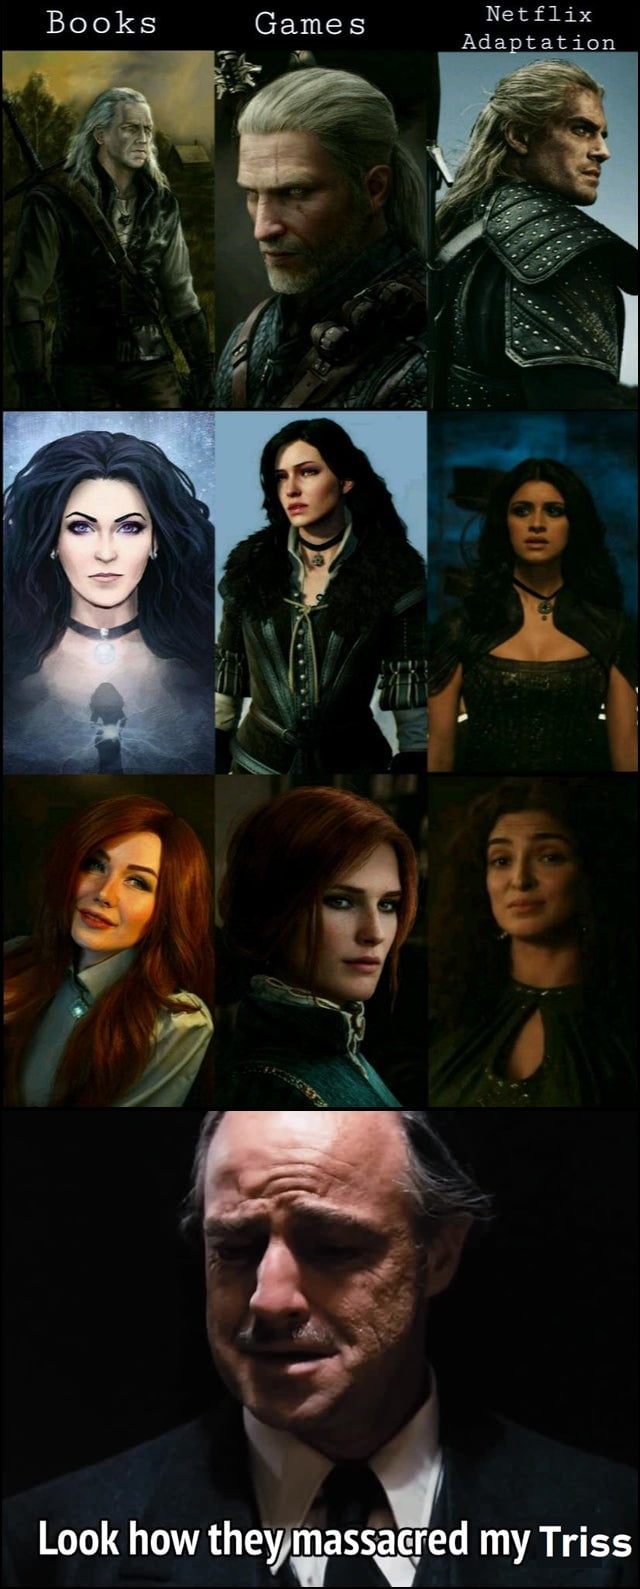 witcher memes - collage - Books Games Netflix Adaptation Look how they massacred my Triss